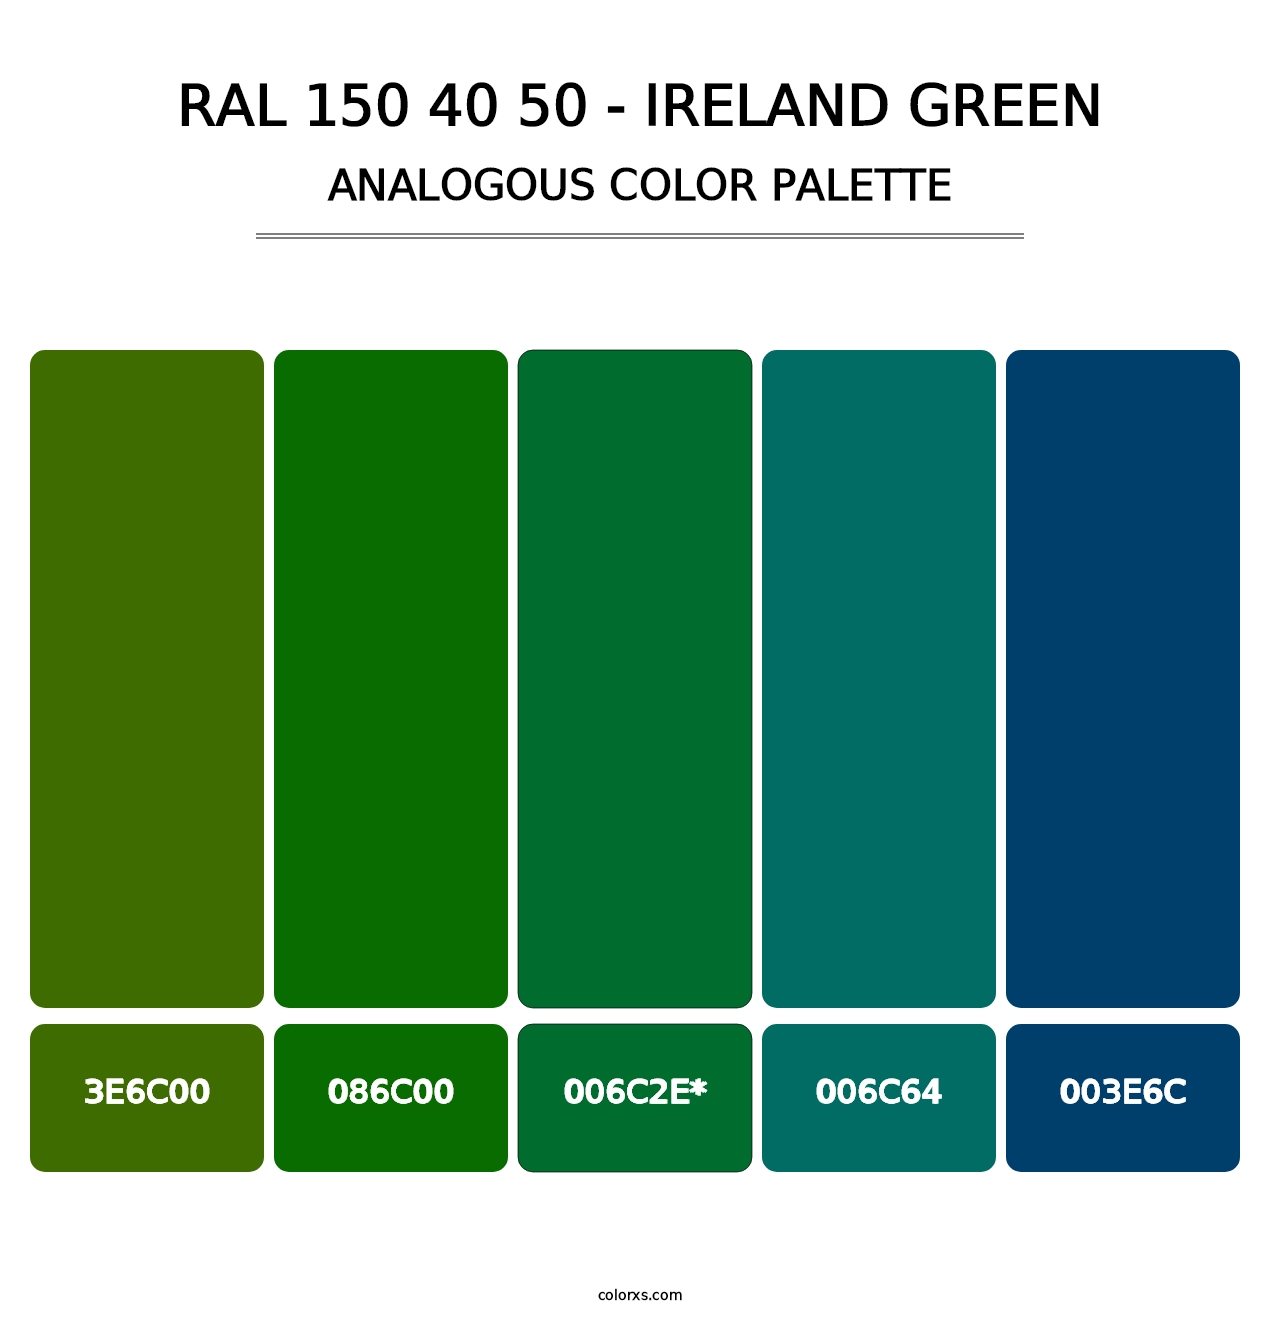 RAL 150 40 50 - Ireland Green - Analogous Color Palette